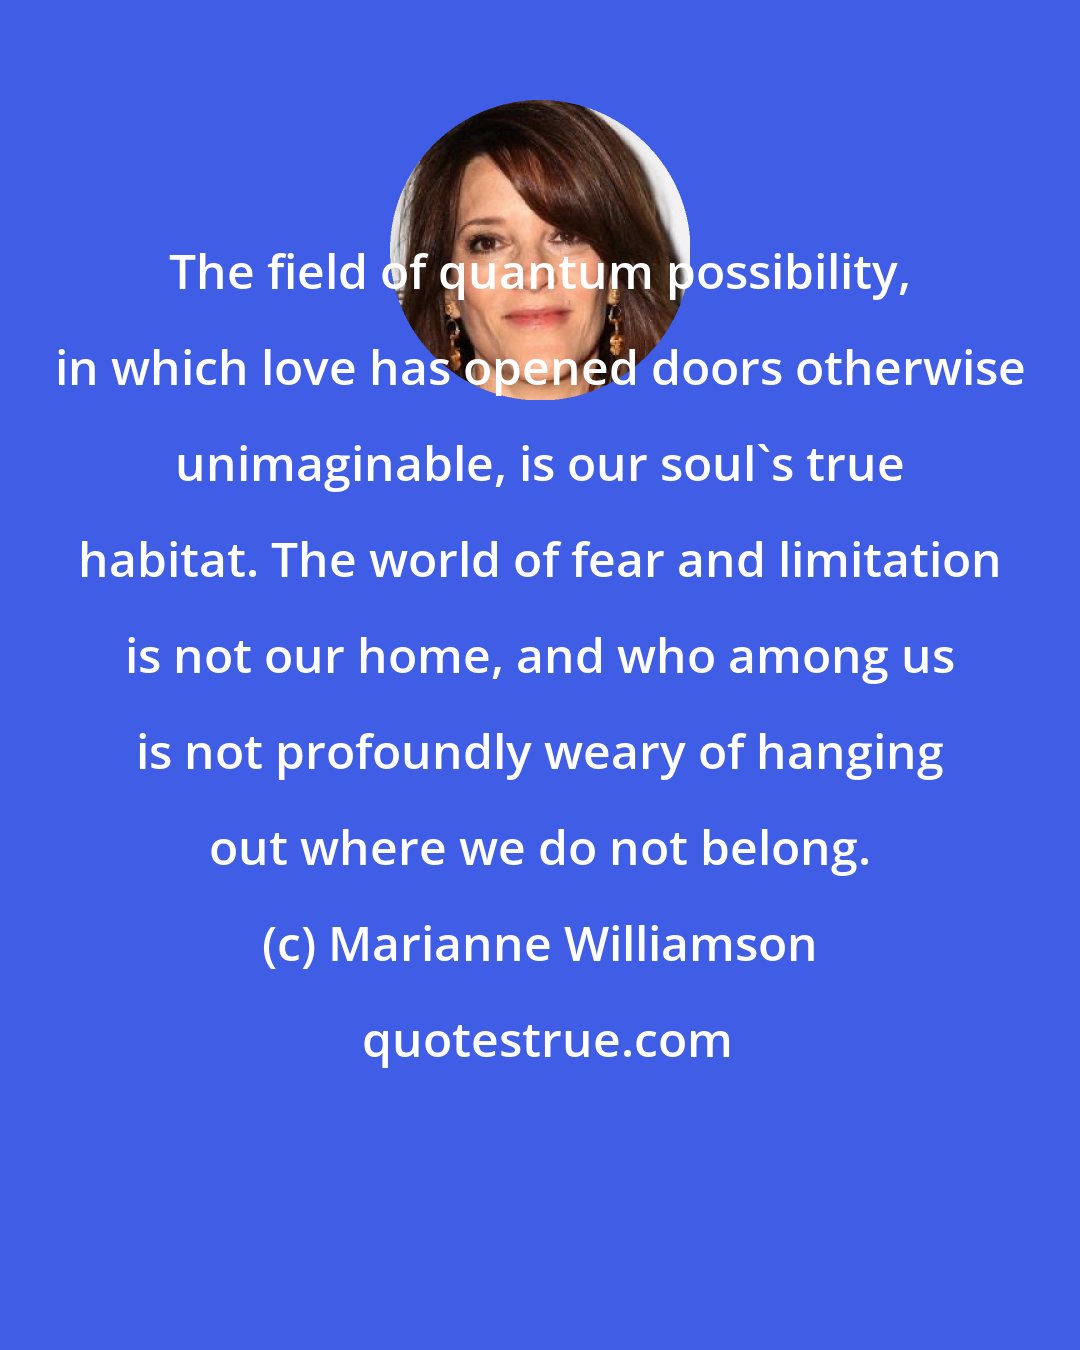 Marianne Williamson: The field of quantum possibility, in which love has opened doors otherwise unimaginable, is our soul's true habitat. The world of fear and limitation is not our home, and who among us is not profoundly weary of hanging out where we do not belong.